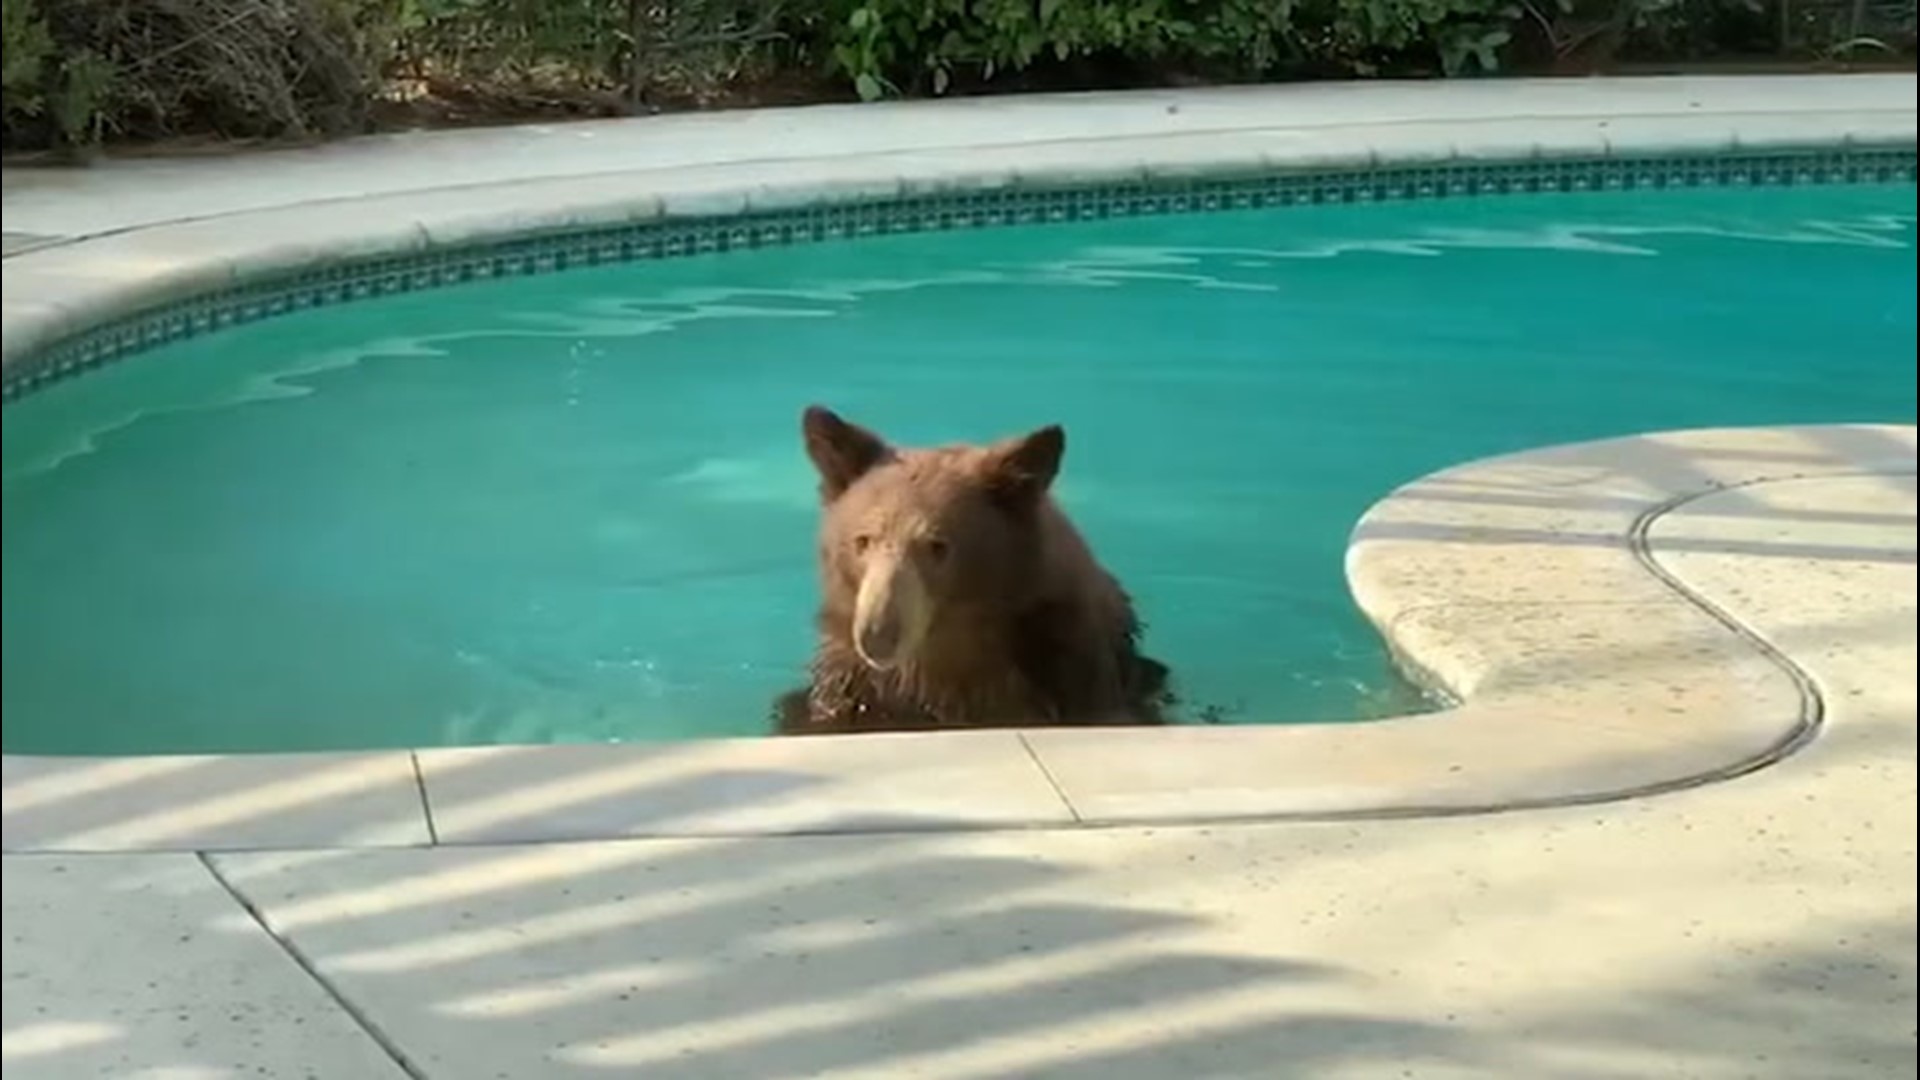 During 'unbearable' temperatures this bear took a dip the Liang Family pool on Aug. 18 in Arcadia, California.